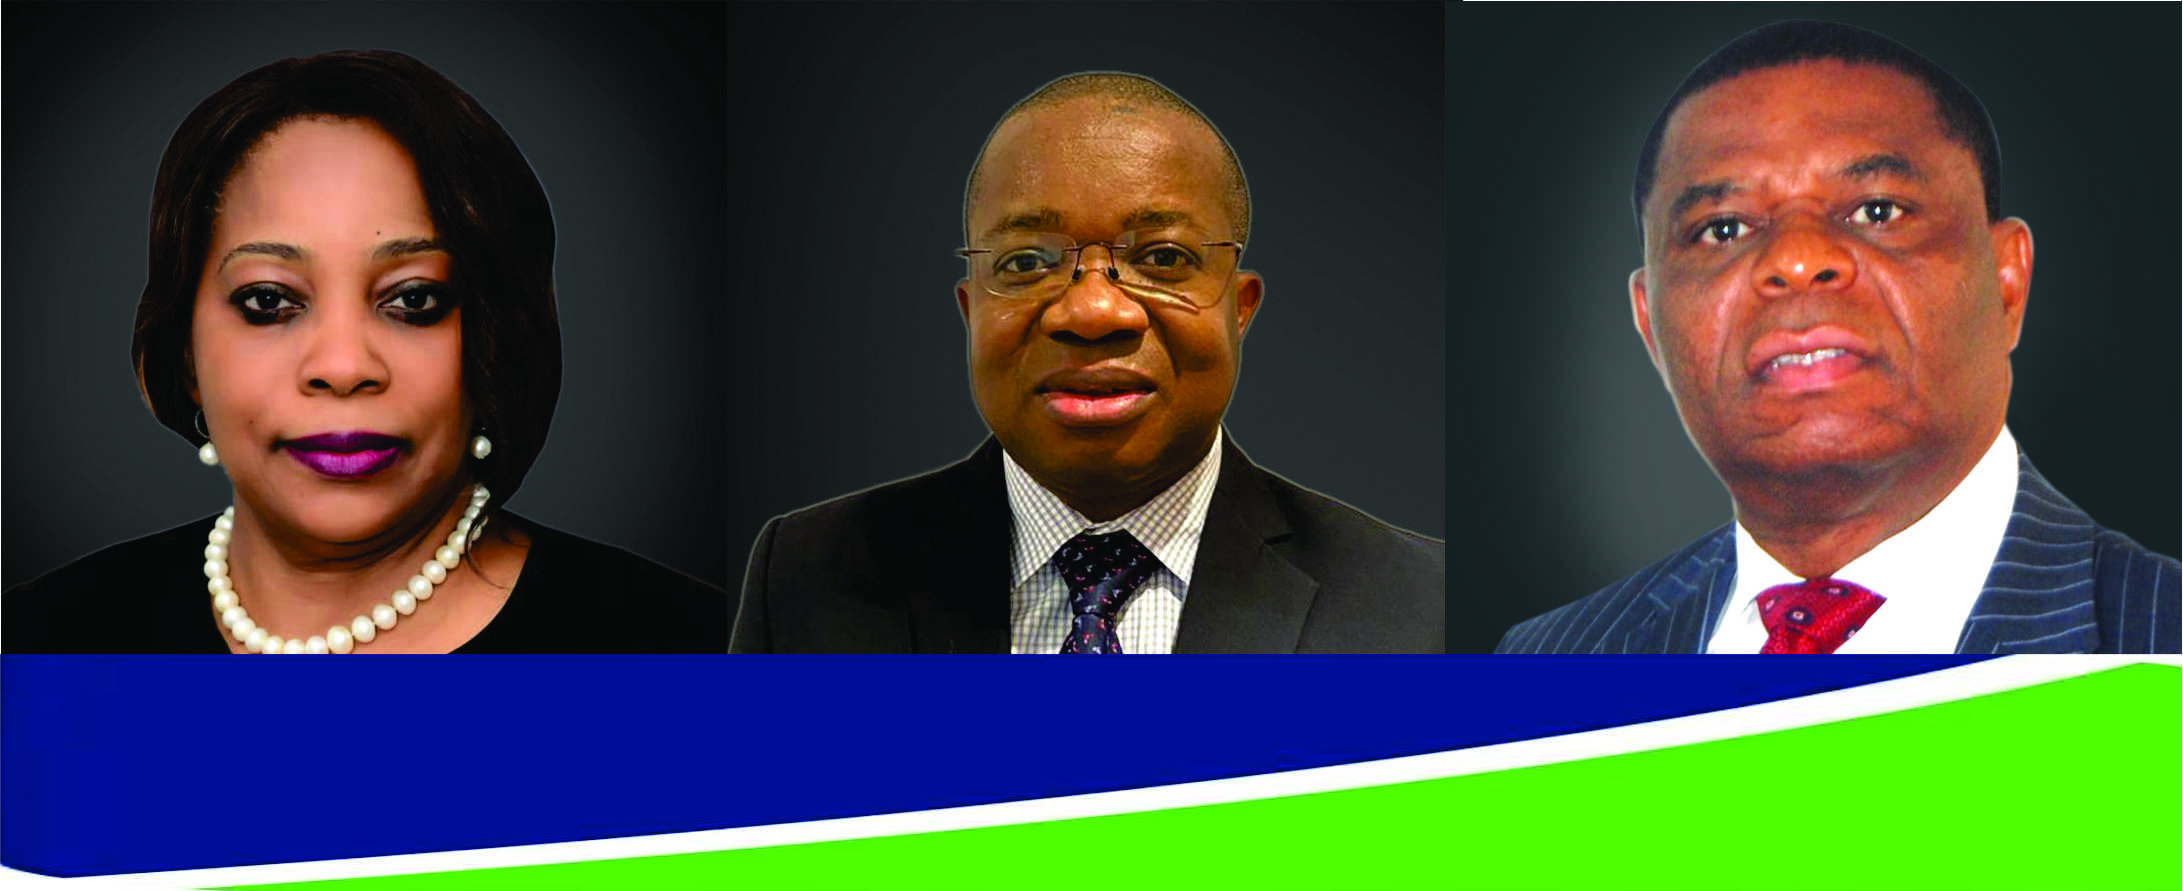 Fidelity bank appoints 3 new non-executive directors into its board of directors